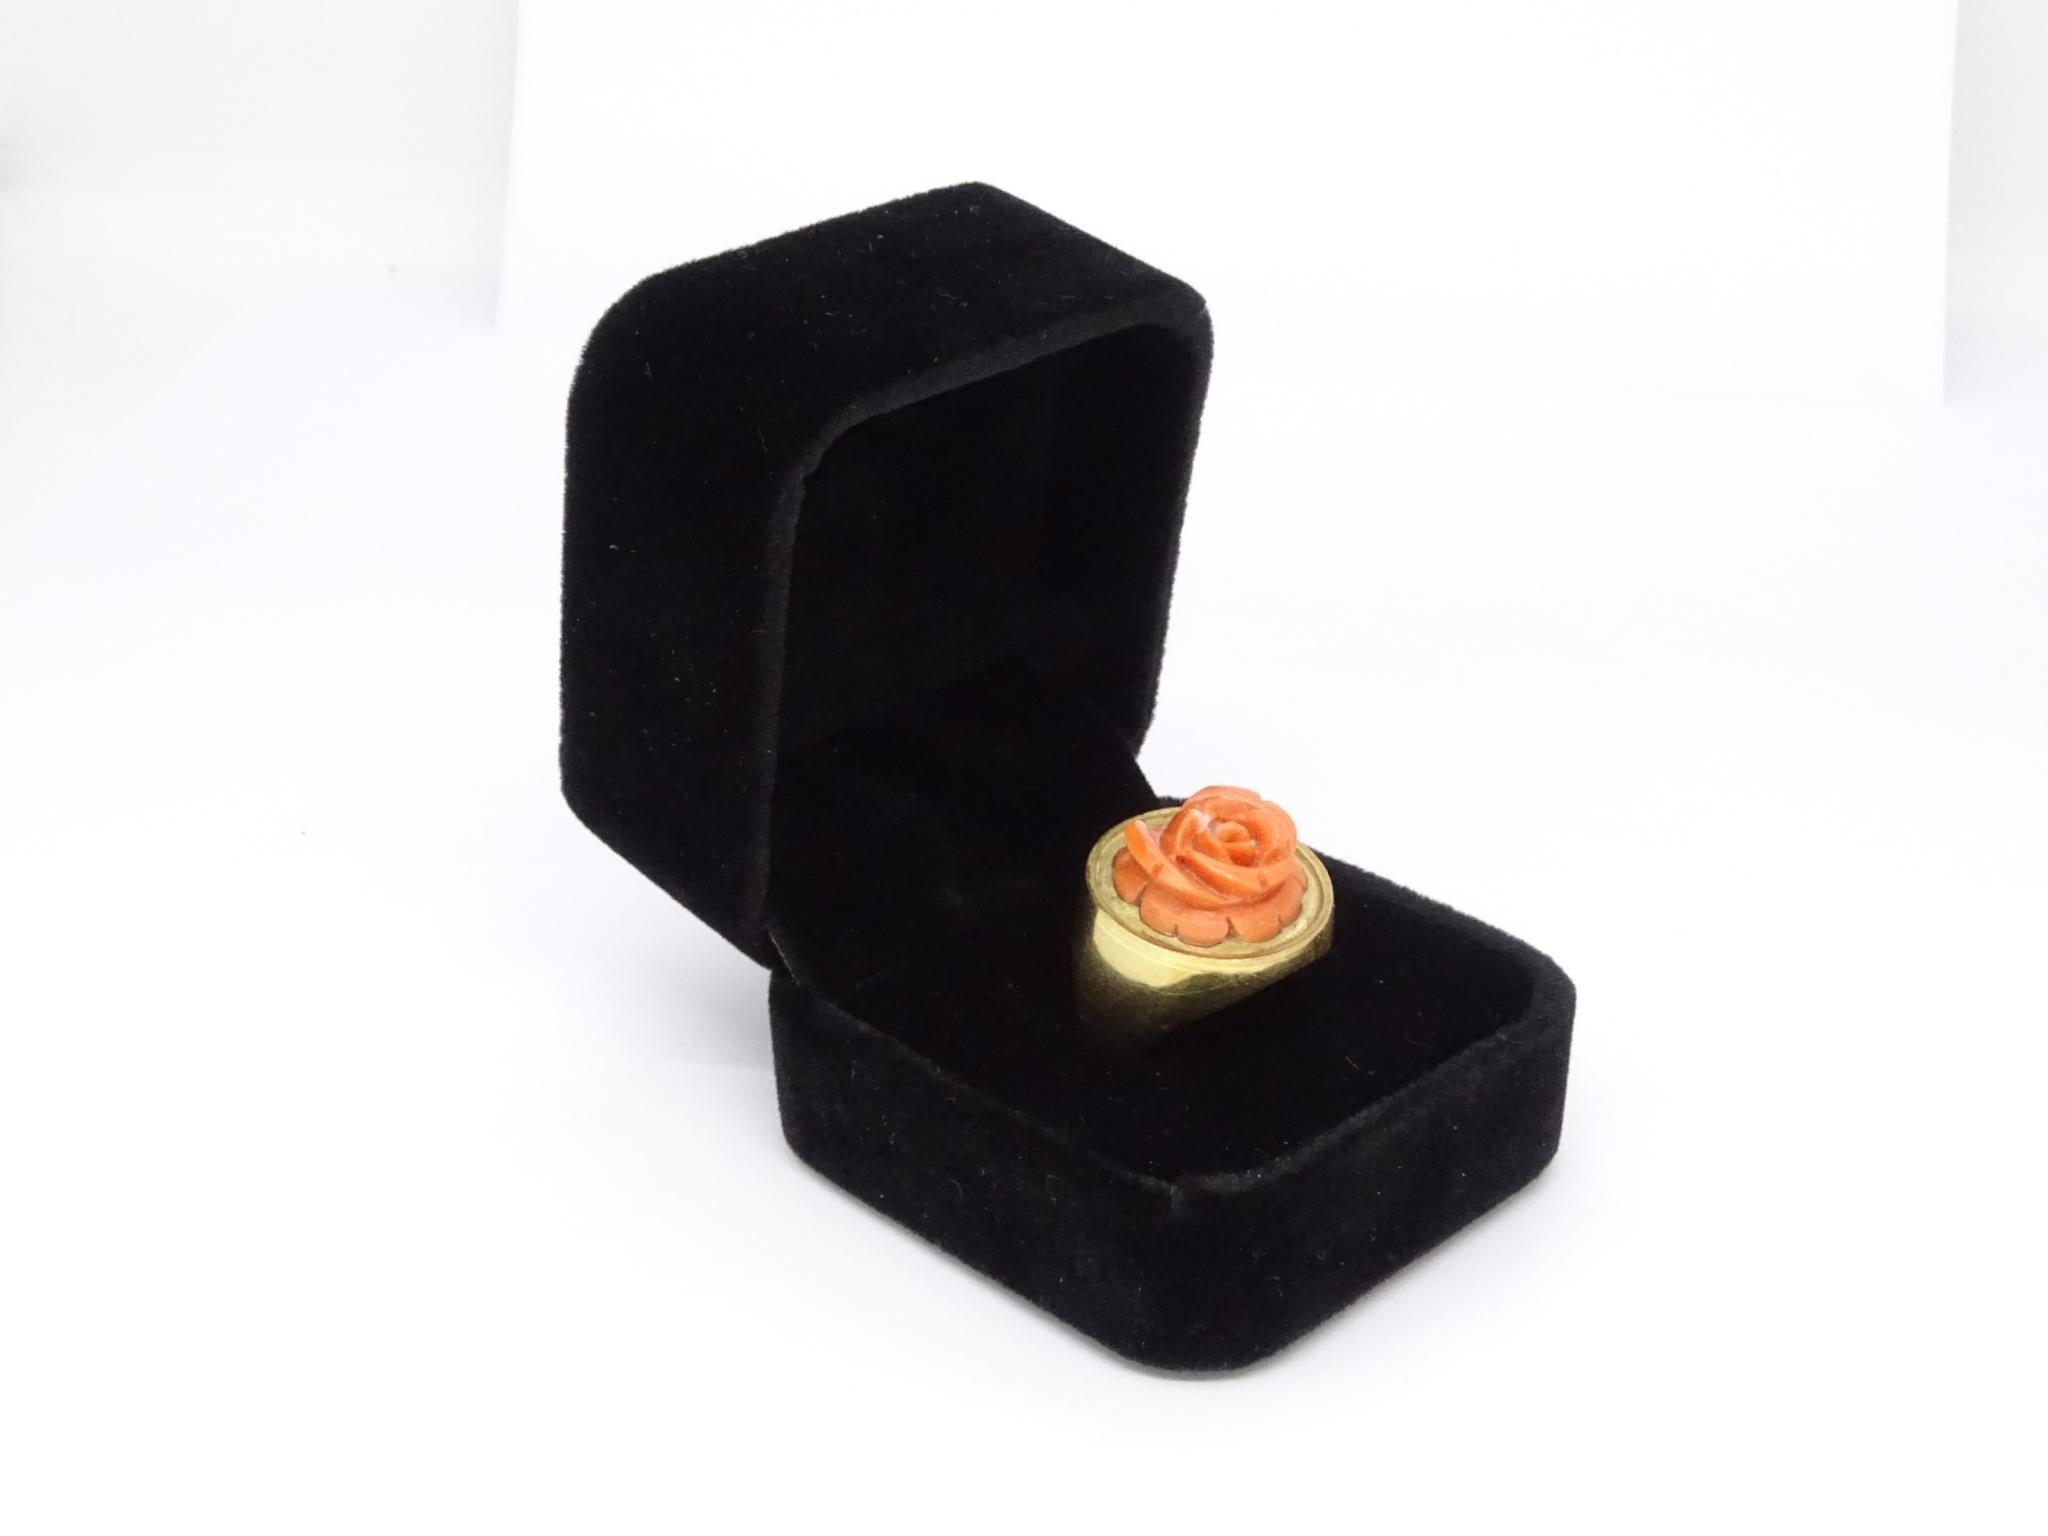 Magnificent seal ring in 18k gold and in the center of which stands out an exceptional rose carved in angel skin coral, from the 60s. Exquisite, delicate and elegant piece.

Precious coral with uniform angel skin color is the most valued in jewelry.